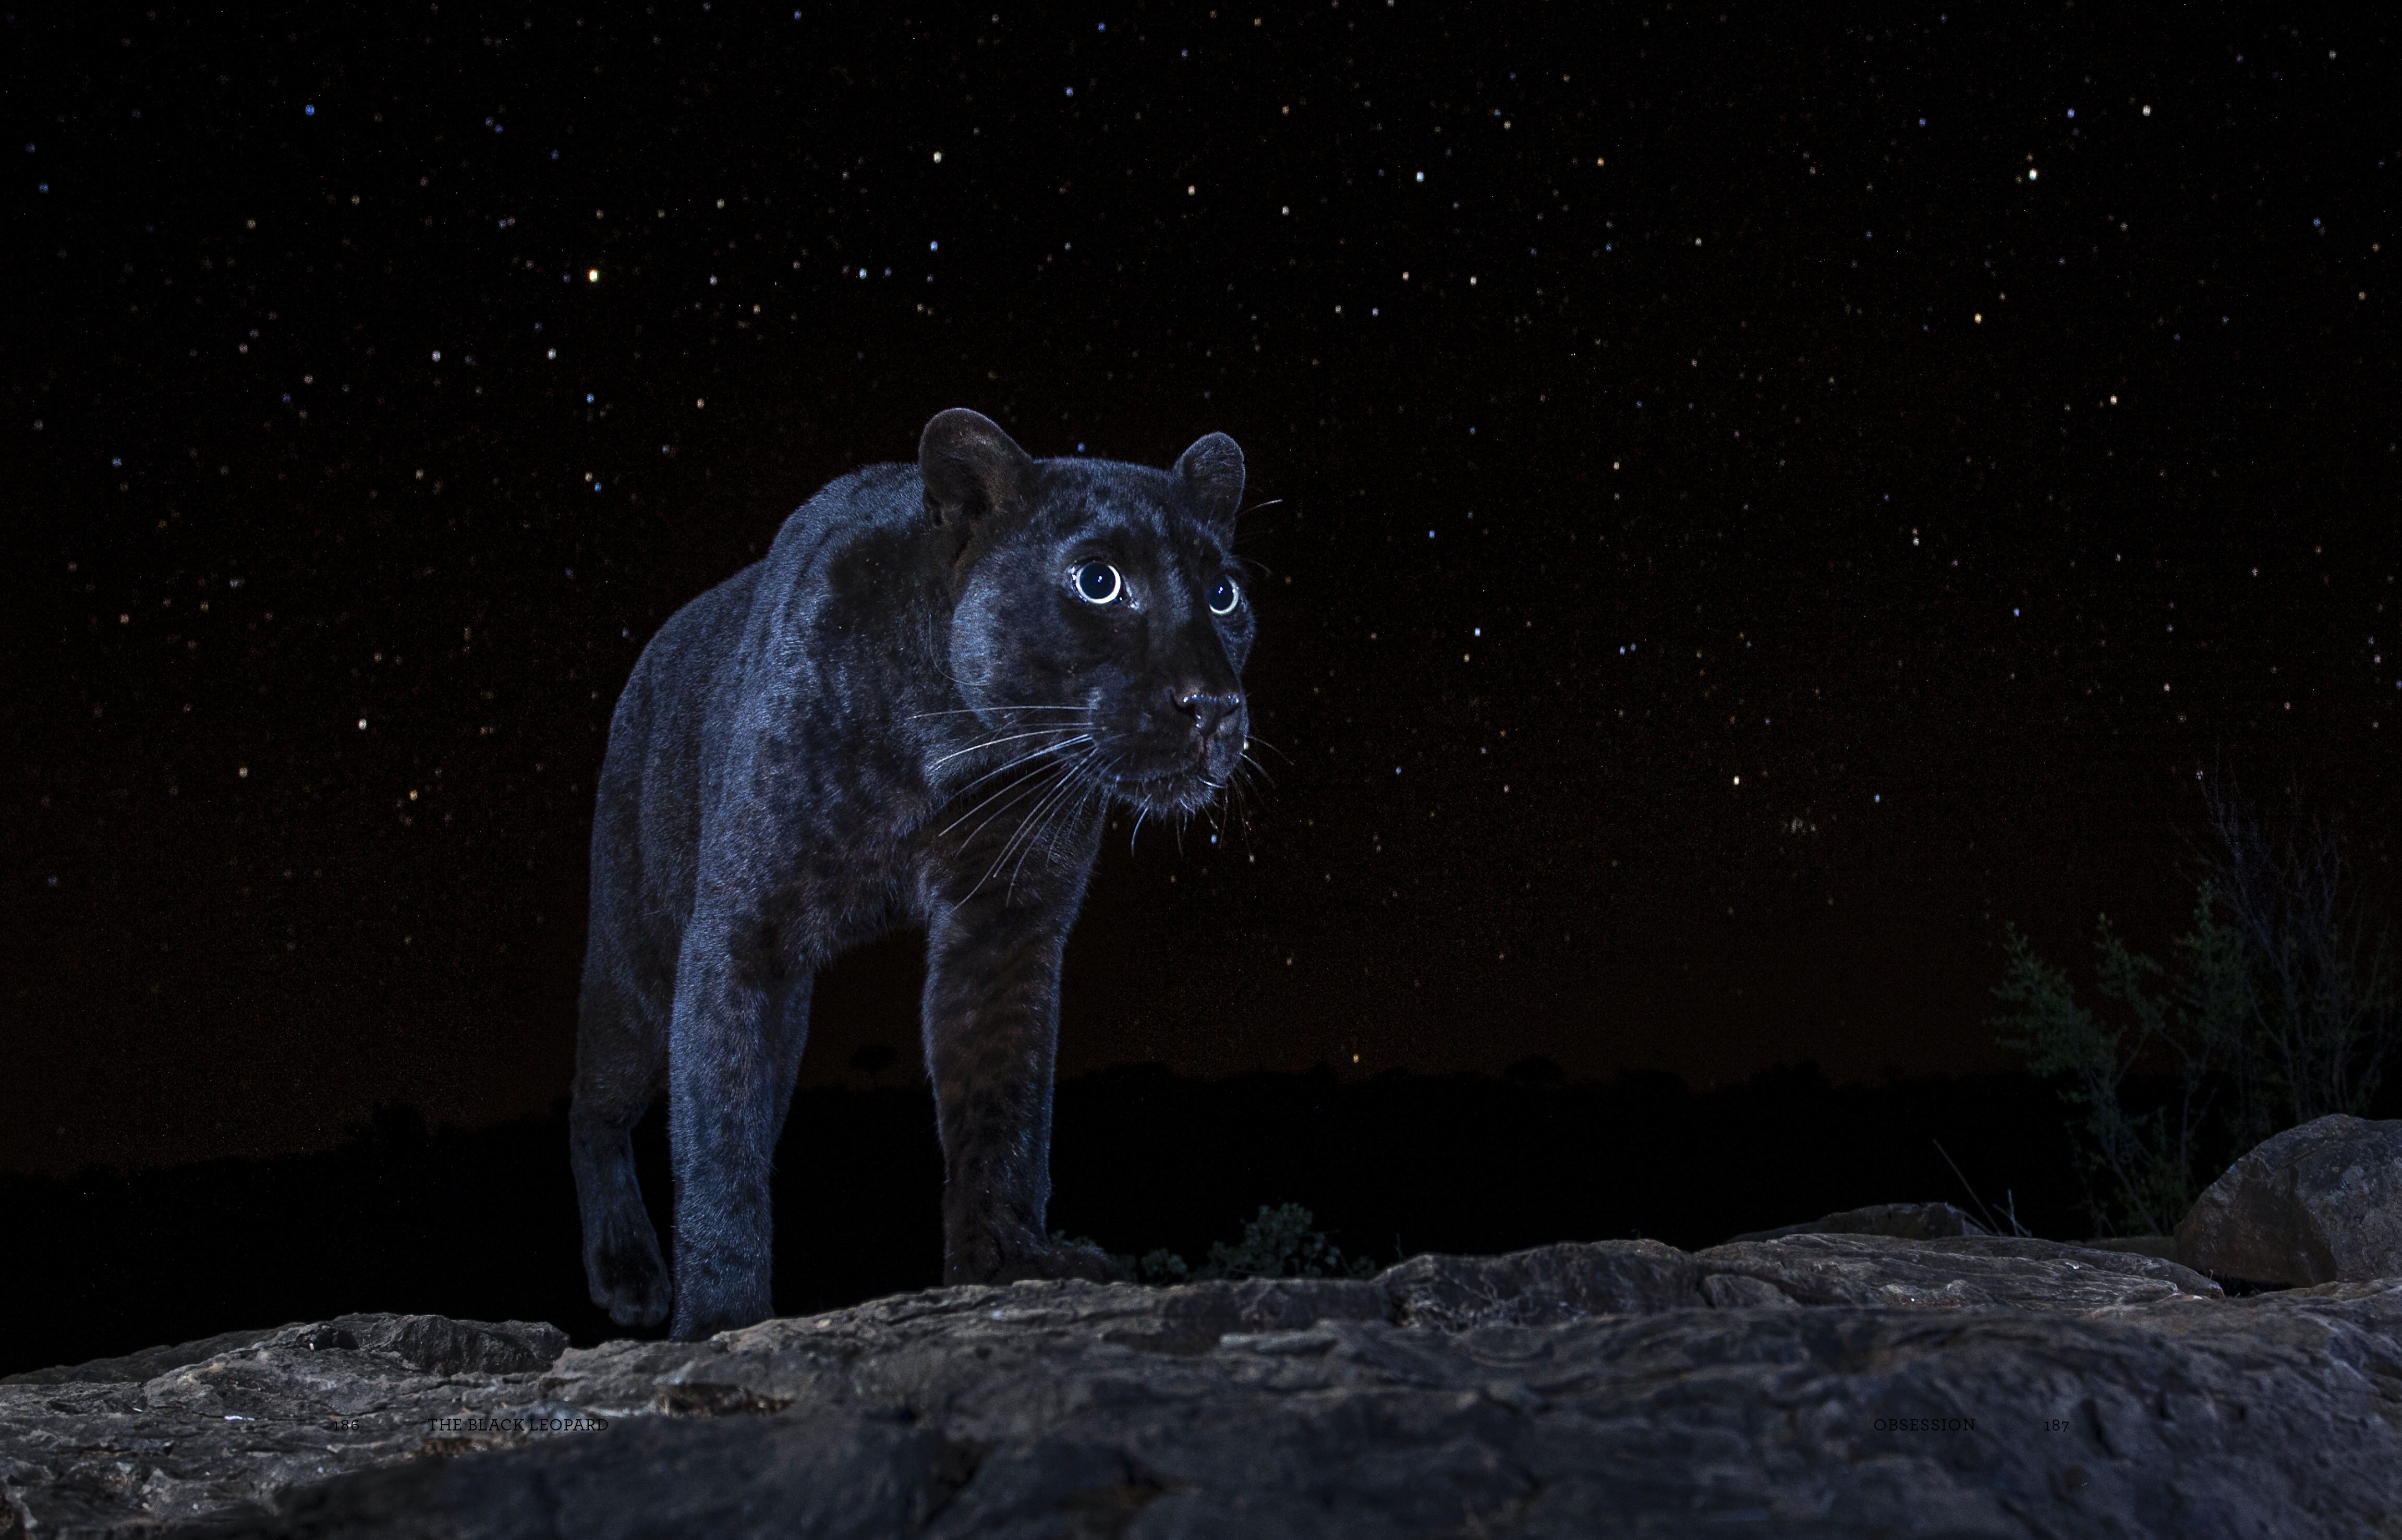 Will Burrard-Lucas Went on a Quest to Find a Rare Black Leopard in Africa